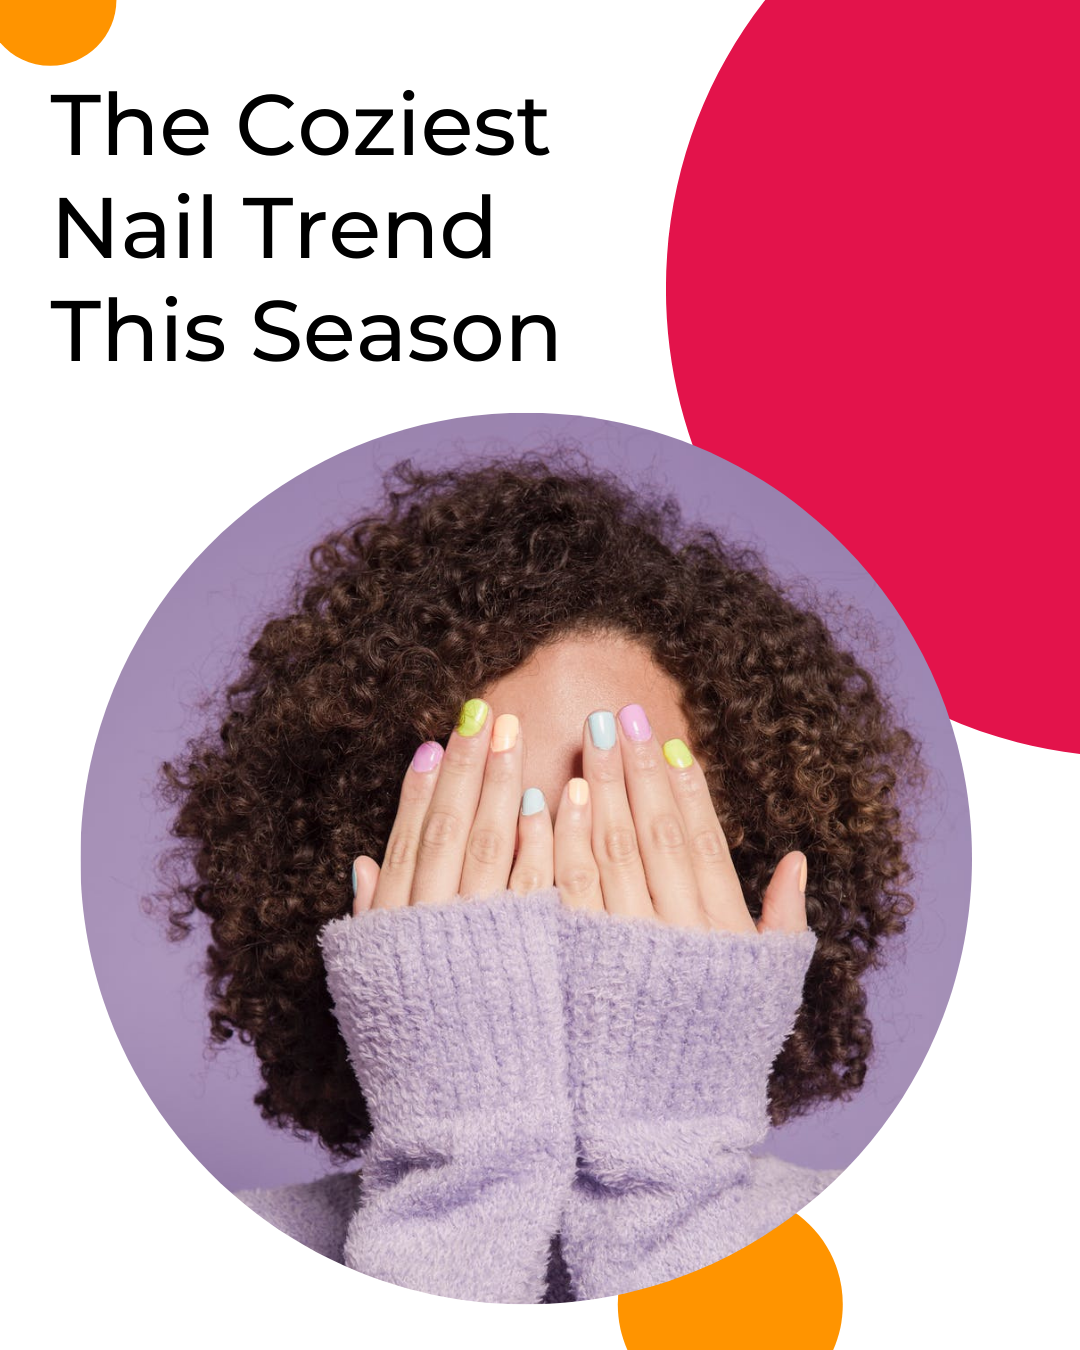 The Coziest Nail Trend This Season